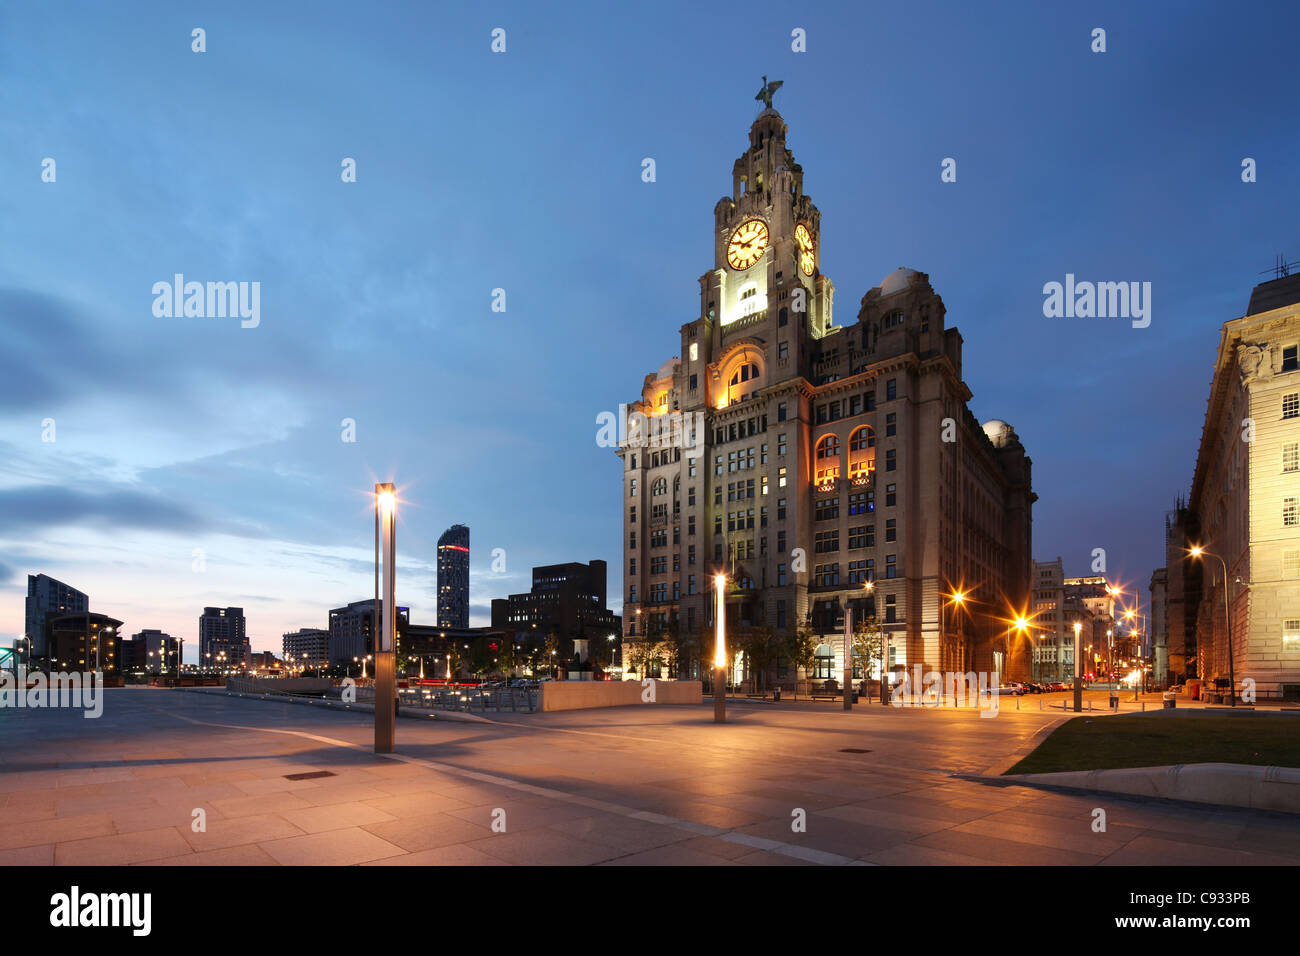 The Royal Liver Building is a Grade I listed building located in Liverpool, England. Stock Photo